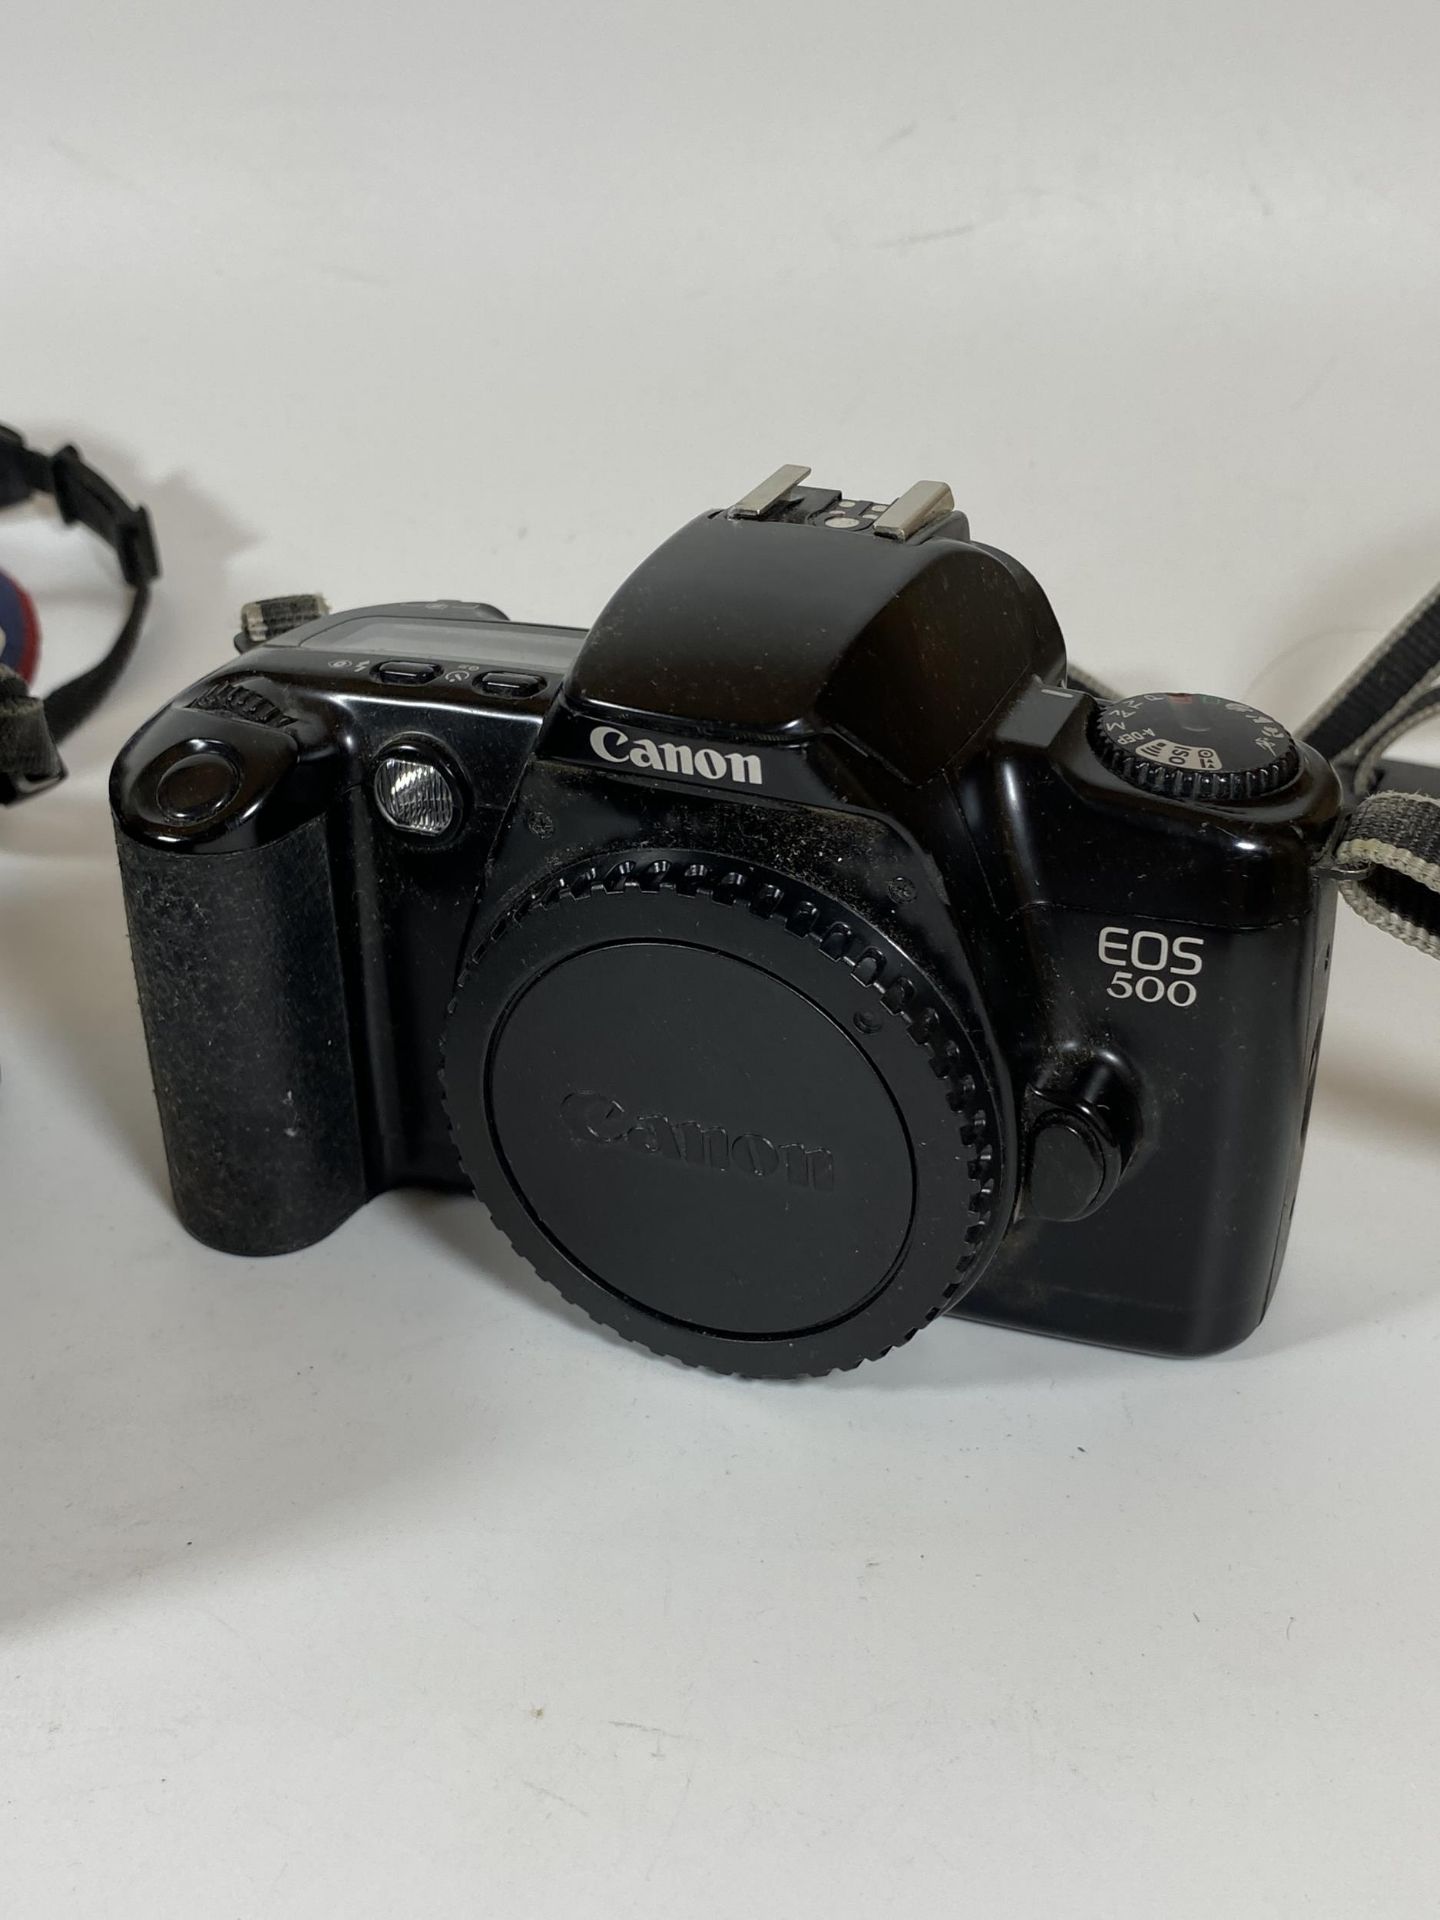 TWO VINTAGE CANON CAMERAS - EOS 500 FITTED WITH CANON ZOOM LENS EF 28-80MM AND CANON EOS 500 BODY - Image 3 of 4